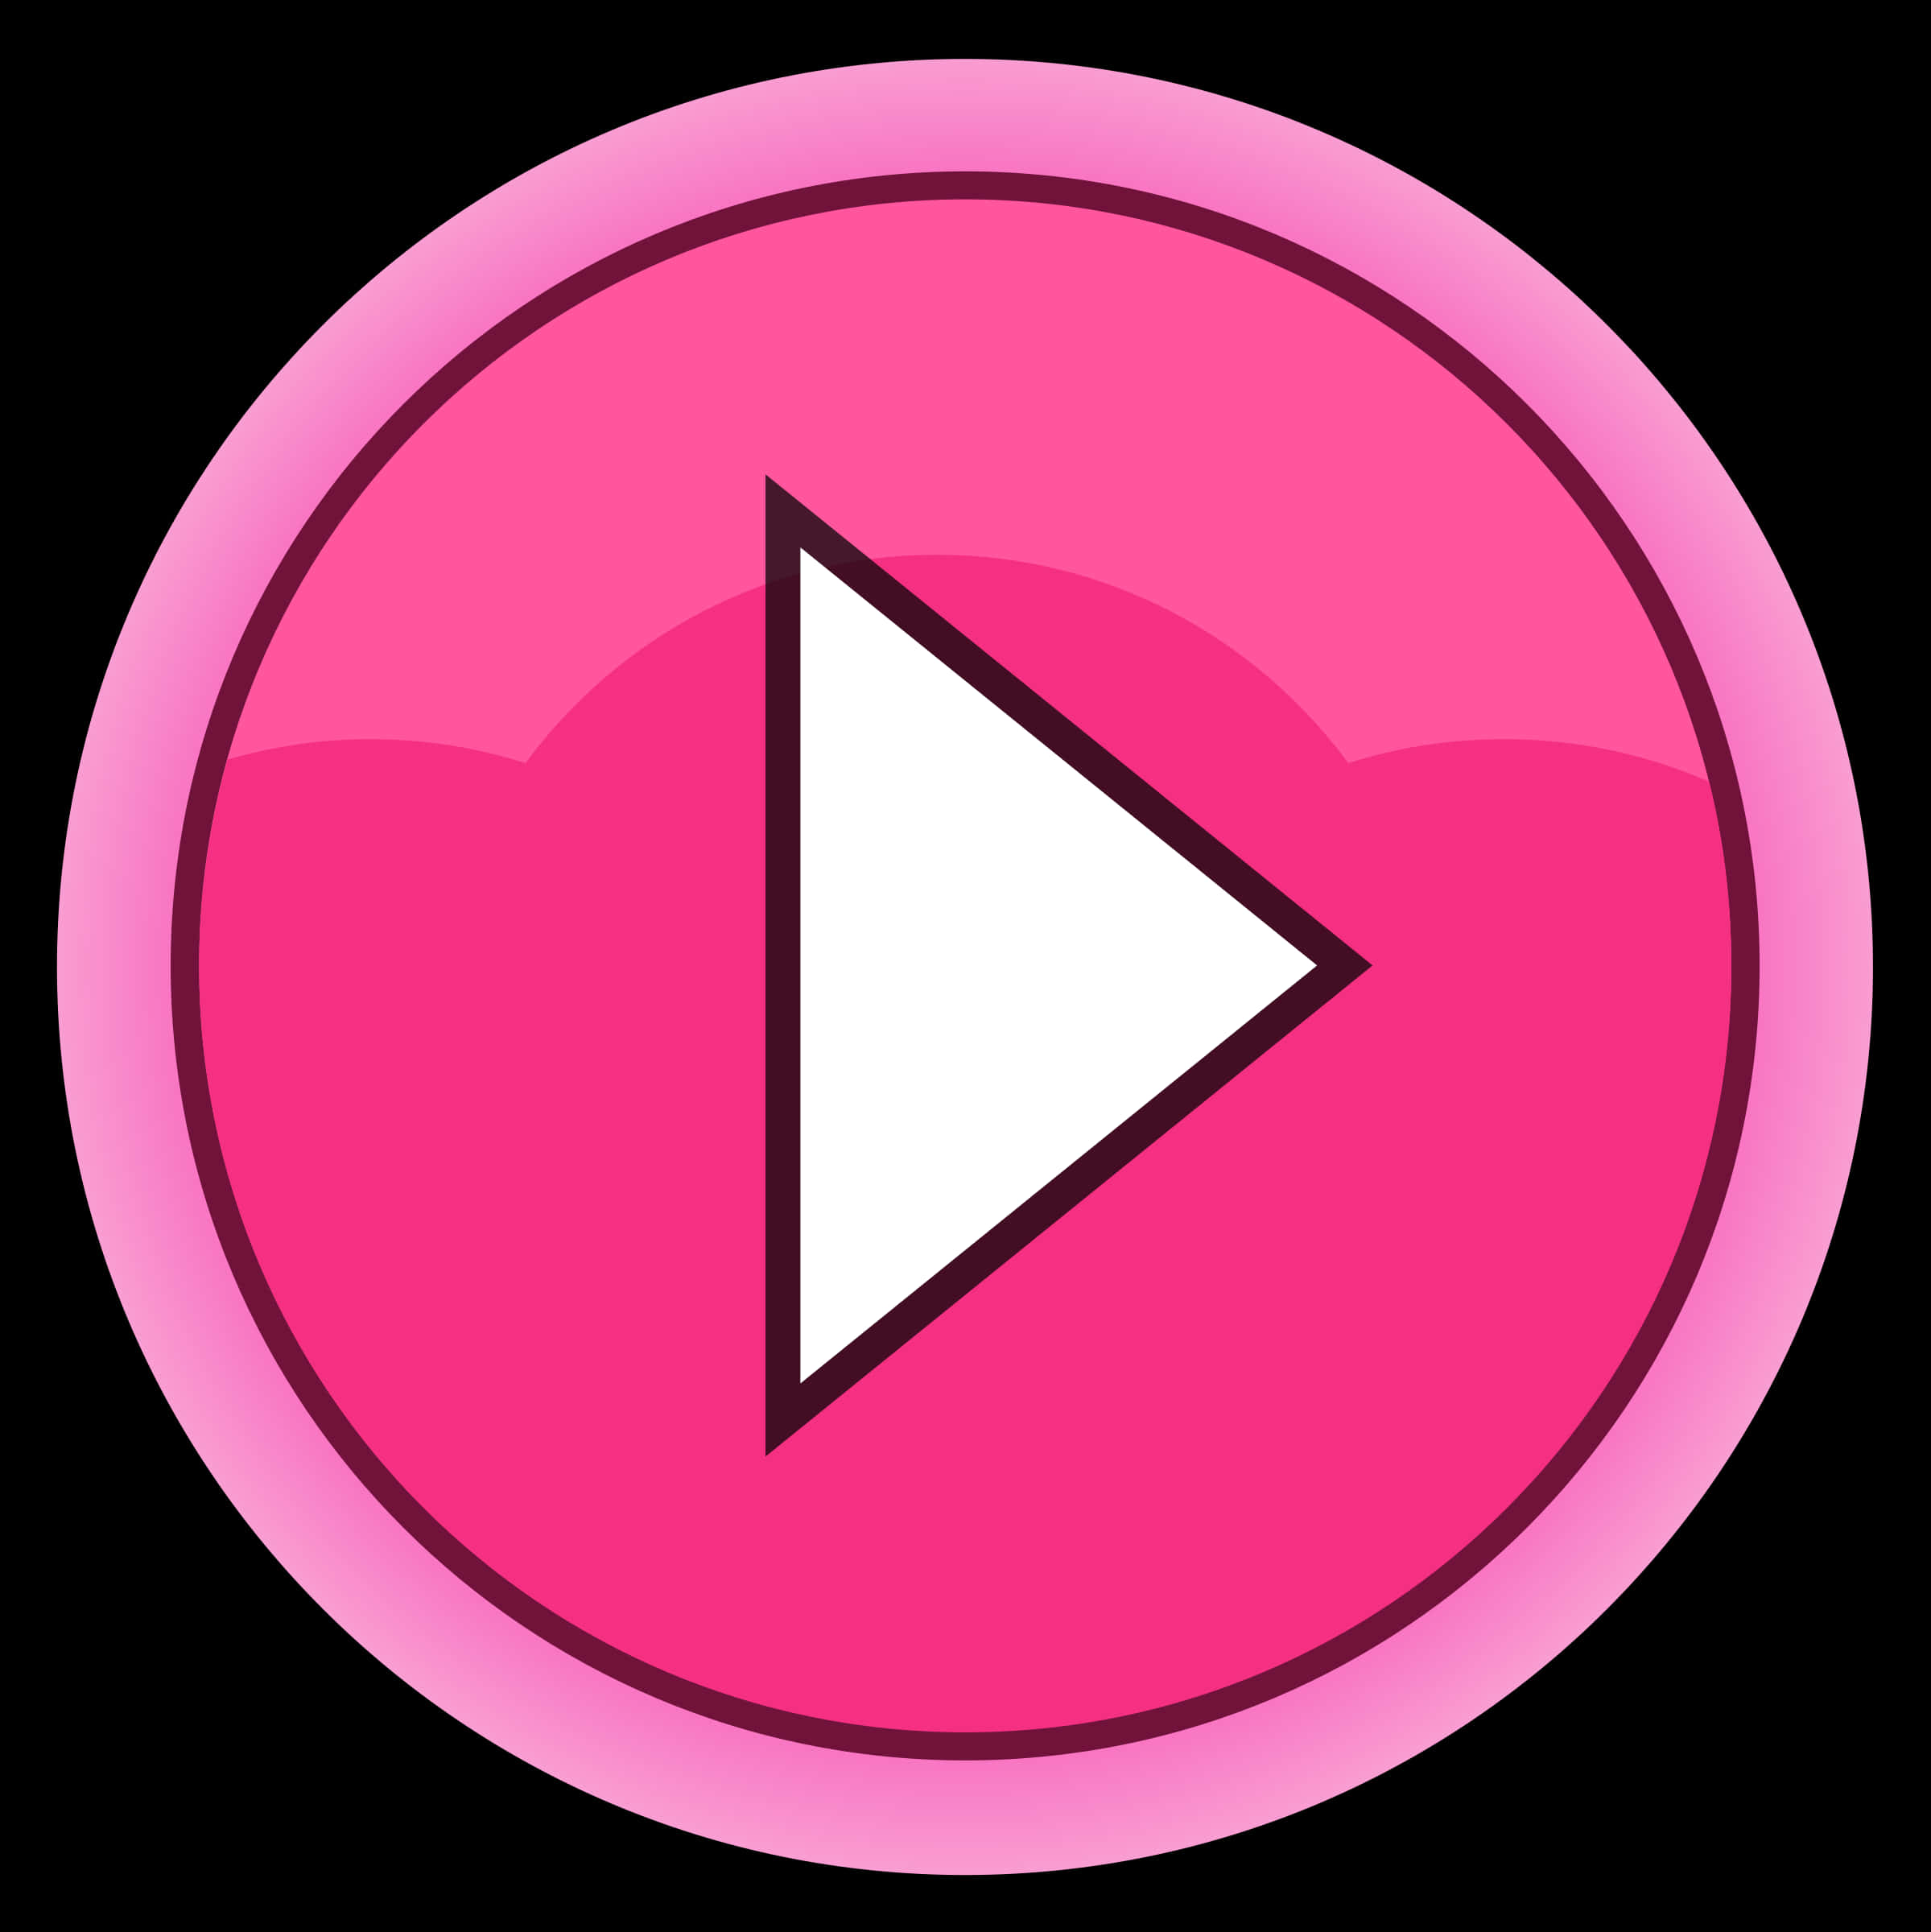 A Pink Button With A White Arrow